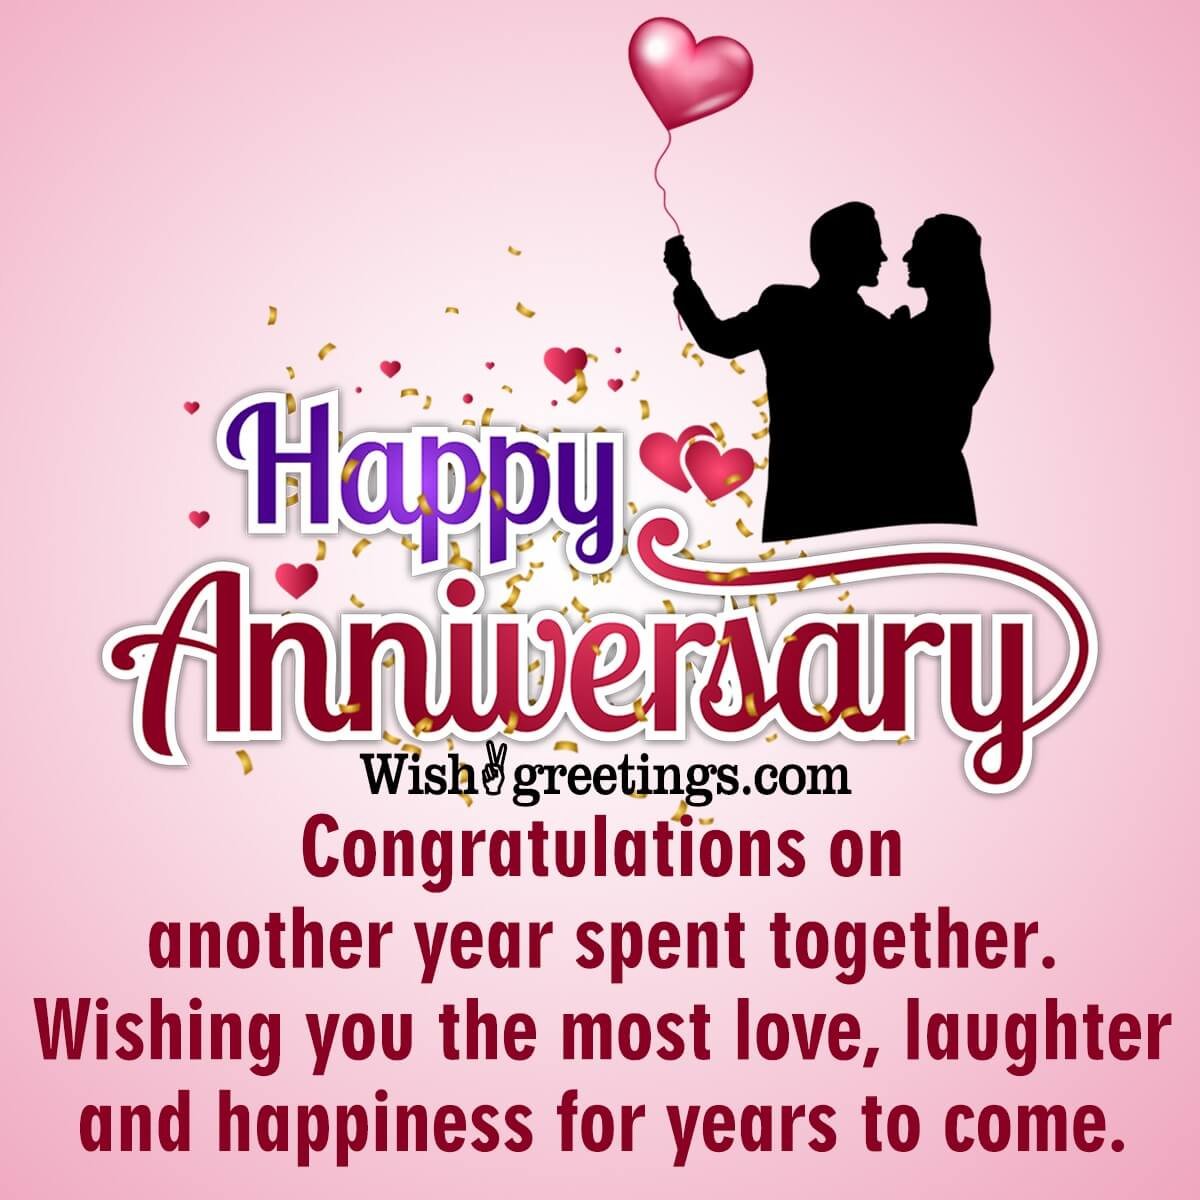 Happy Anniversary Wishes Images - Wish Greetings